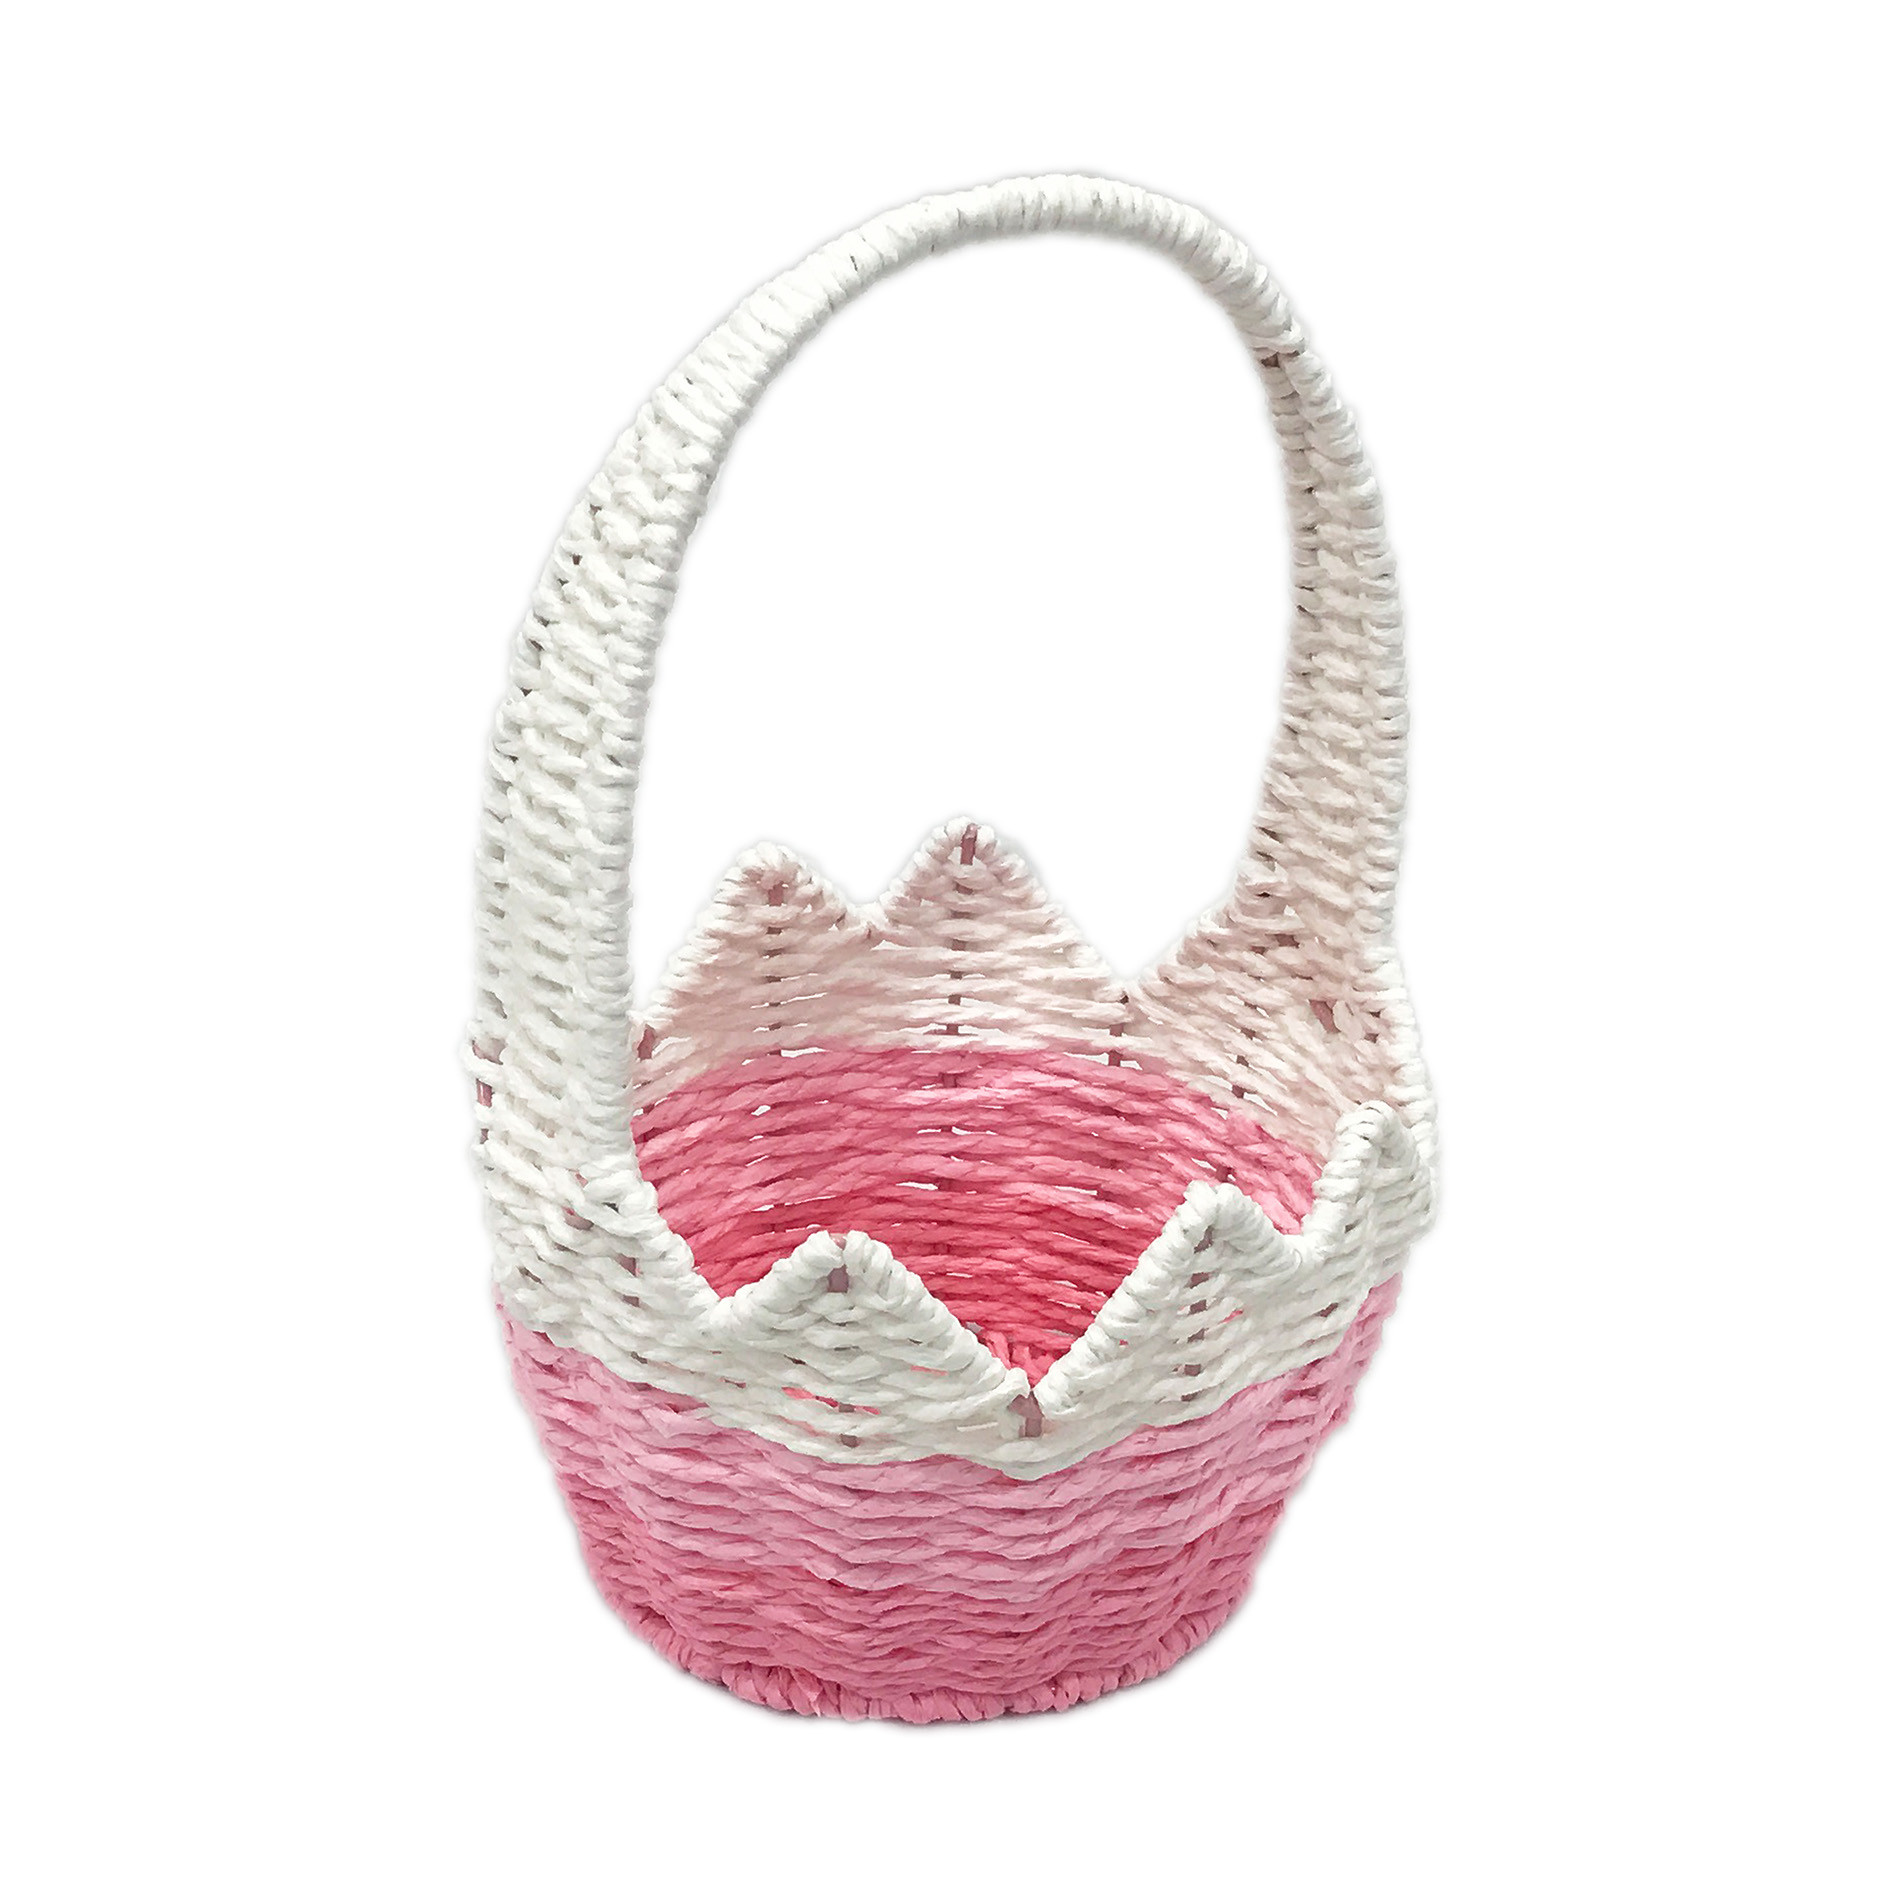 Small Easter Gifts
 Easter Jubilee Small Pink Easter Basket